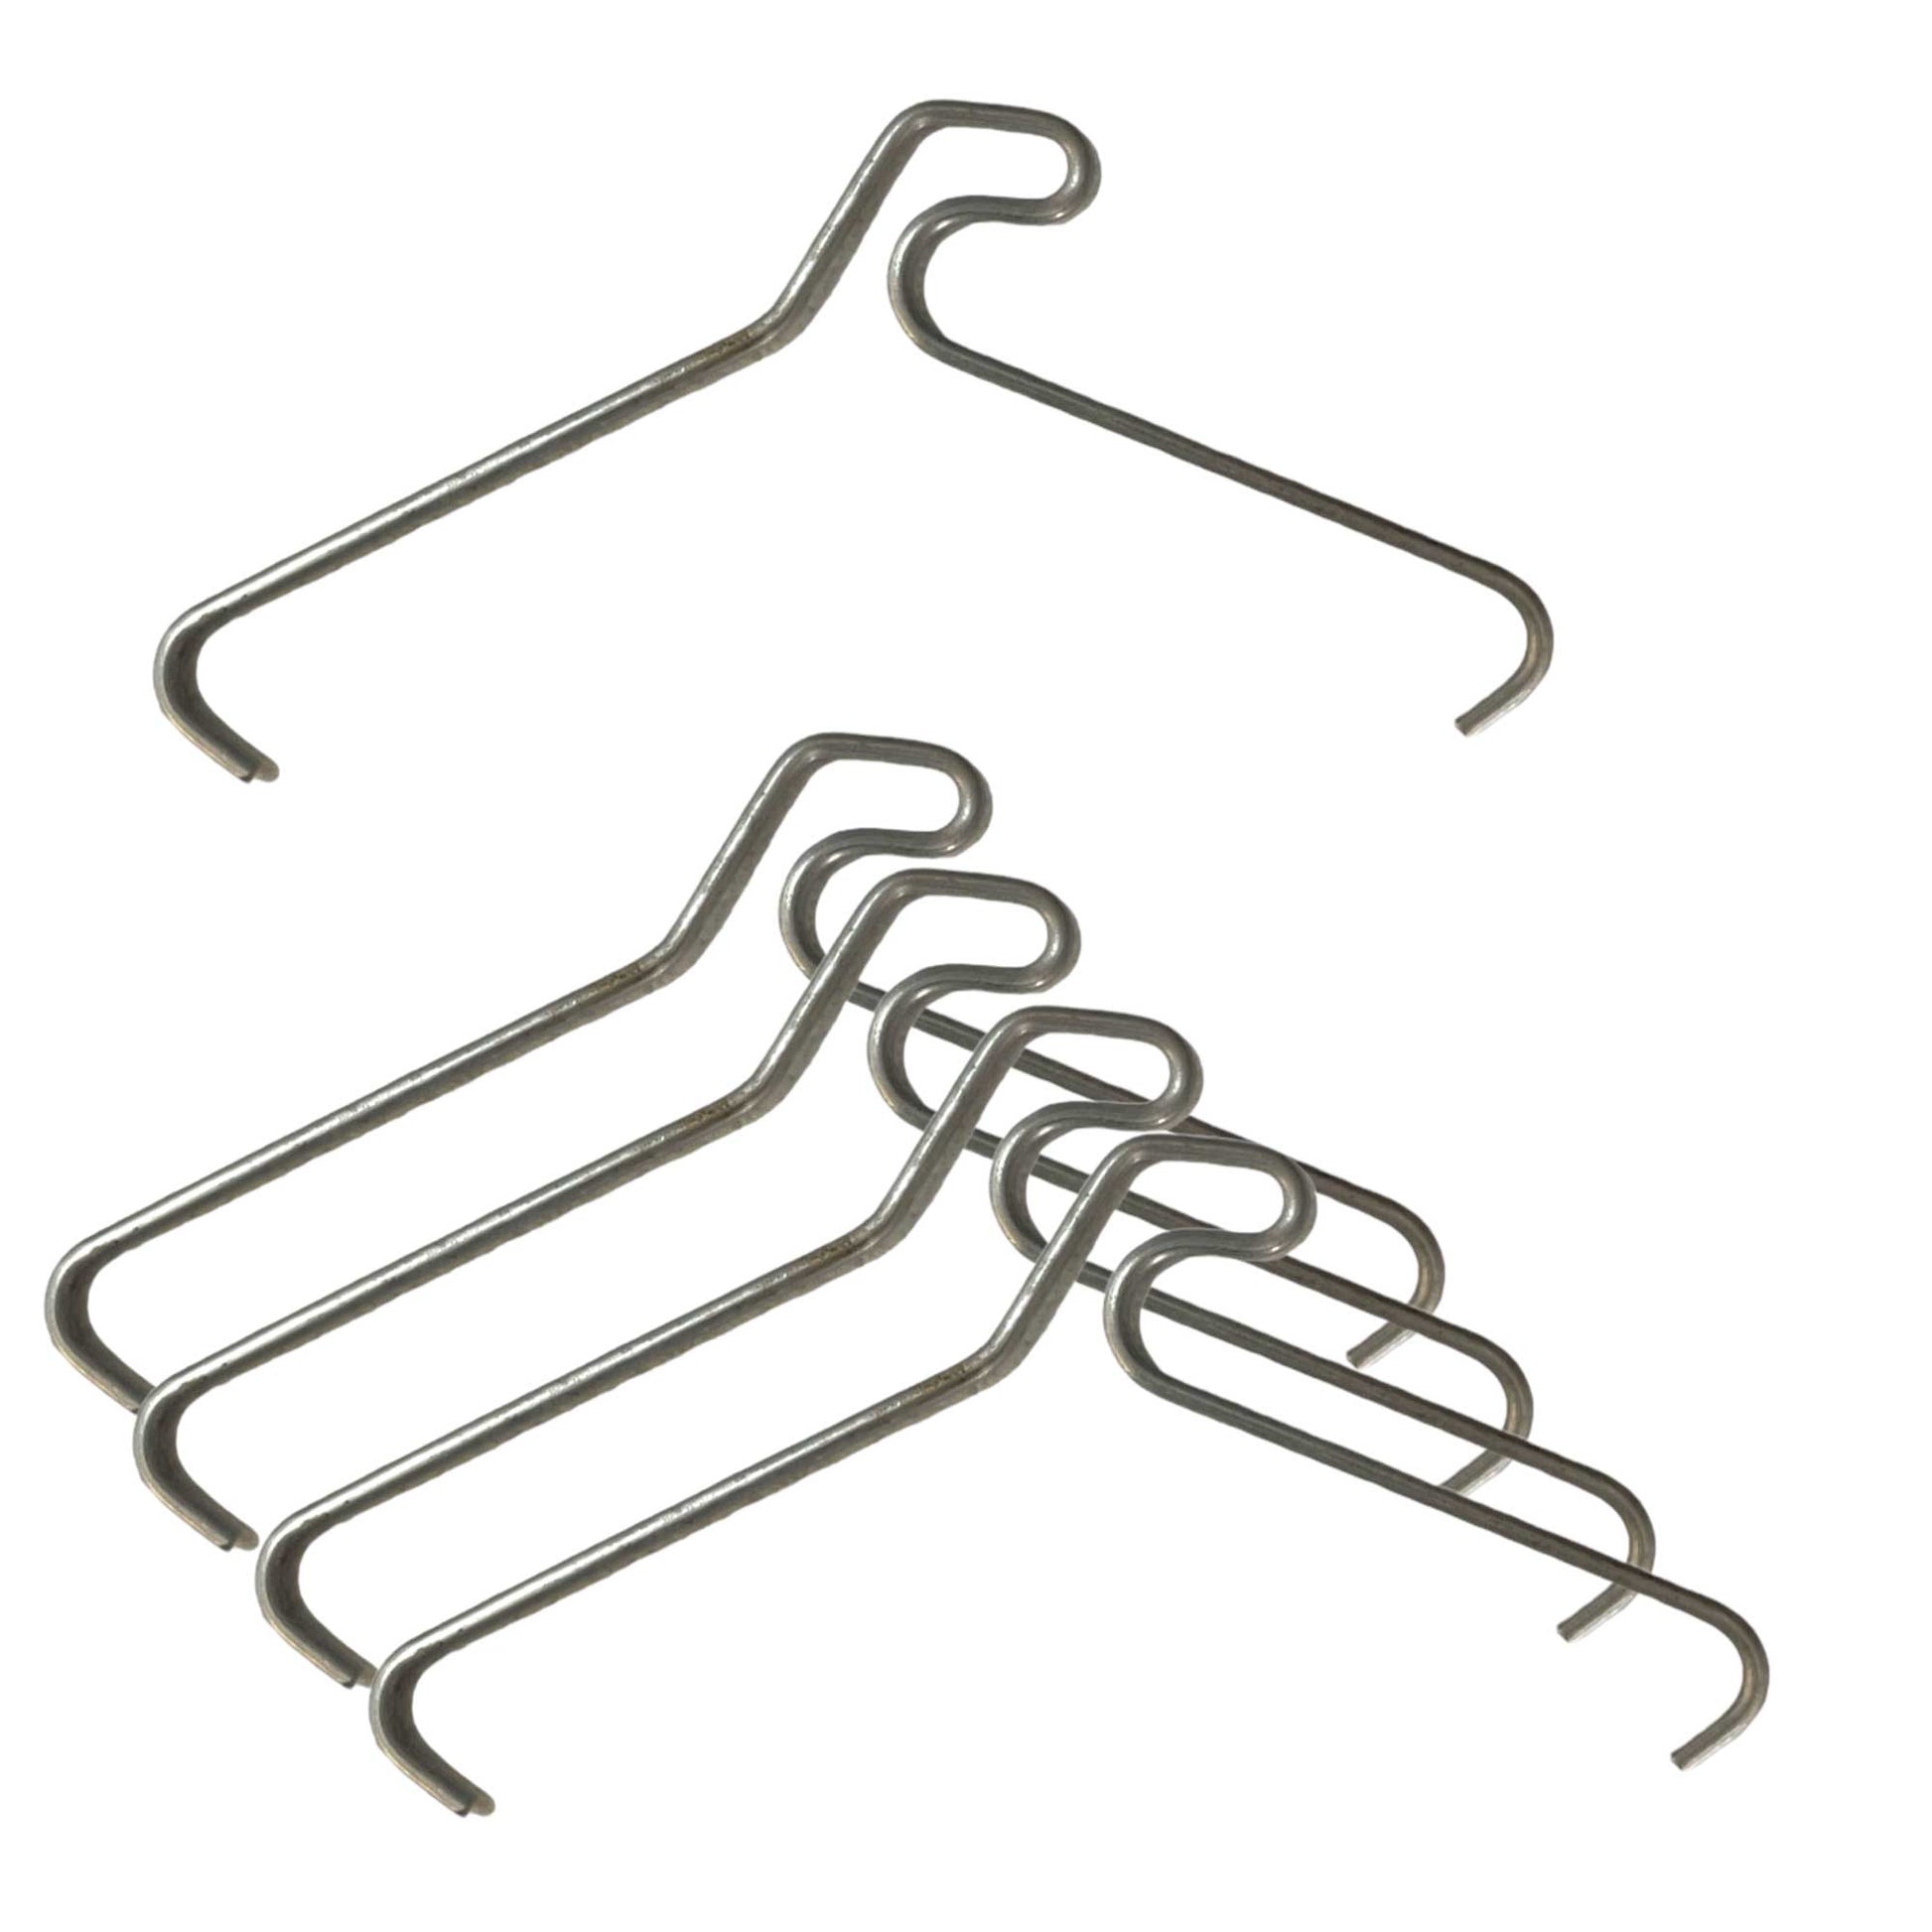 5 Pack 65mm (2.5") Brick Hooks - Wall Crab Clips Hangers For Pictures Plants